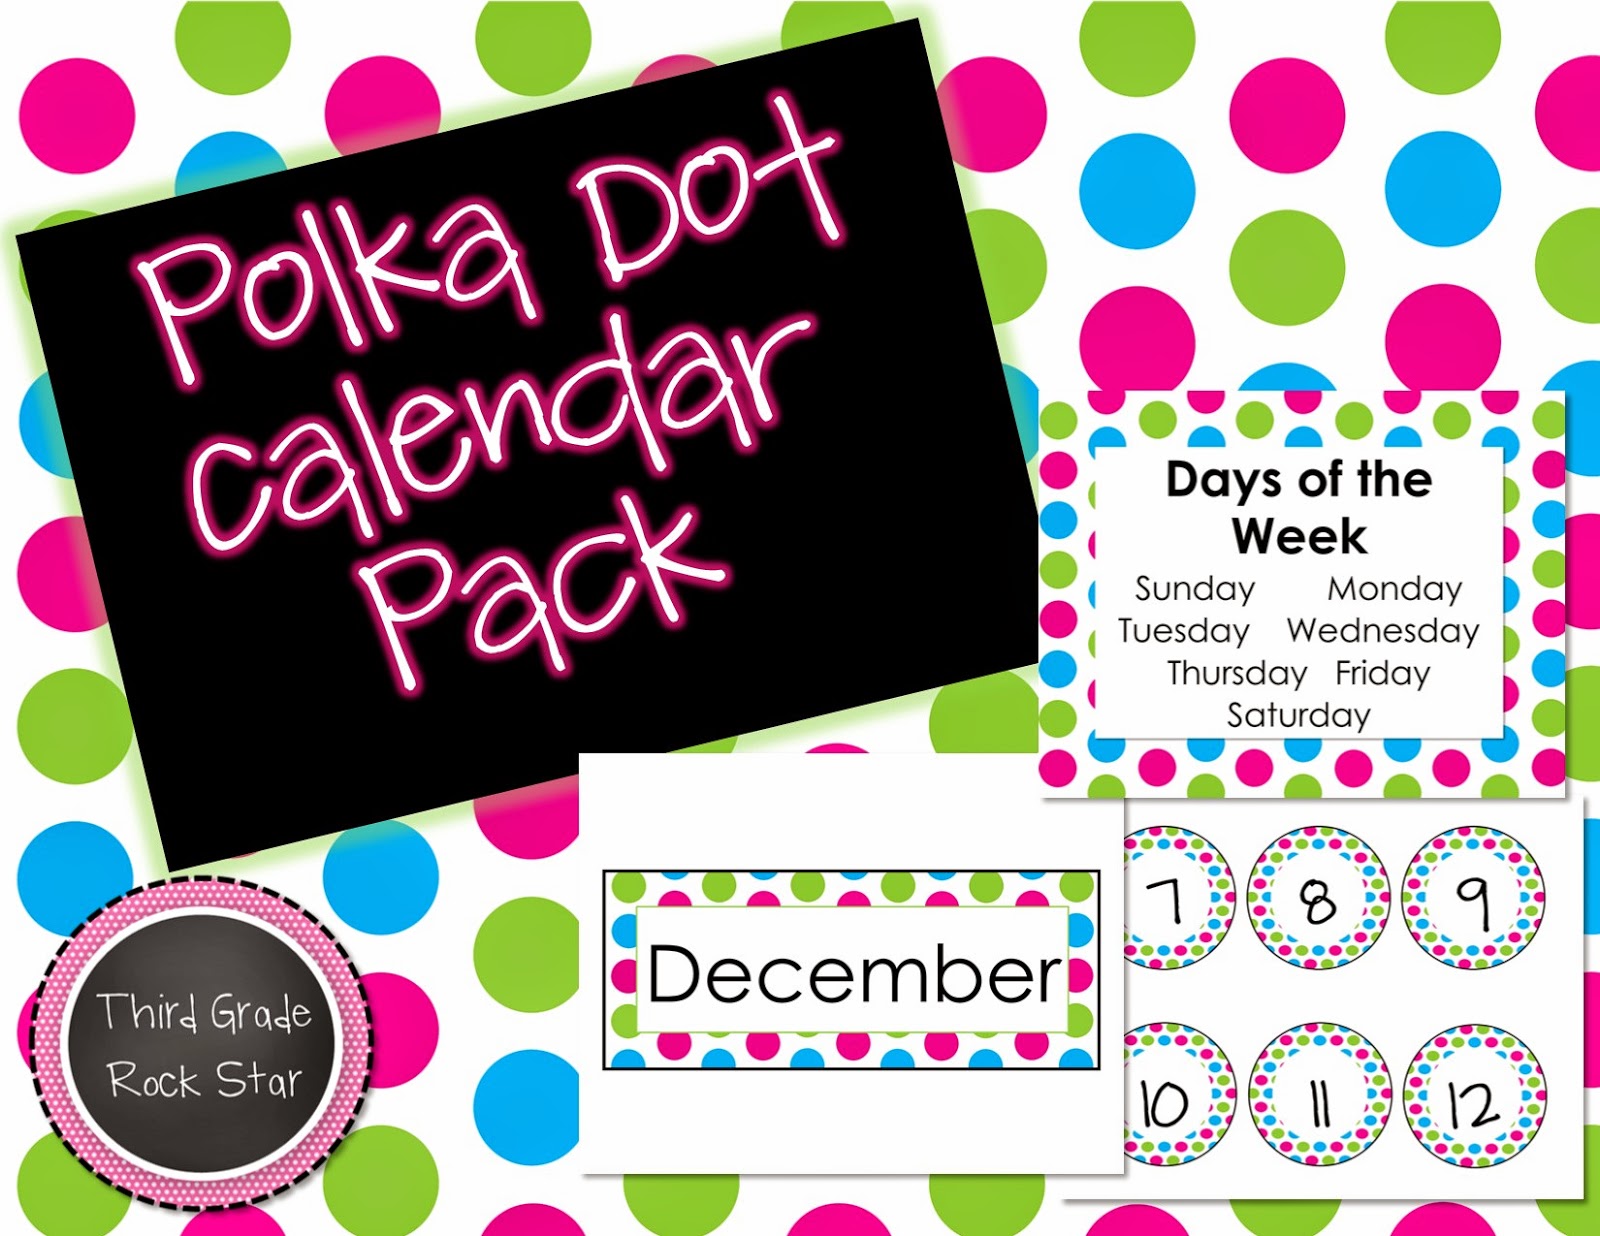  Click here to download the calendar pack!